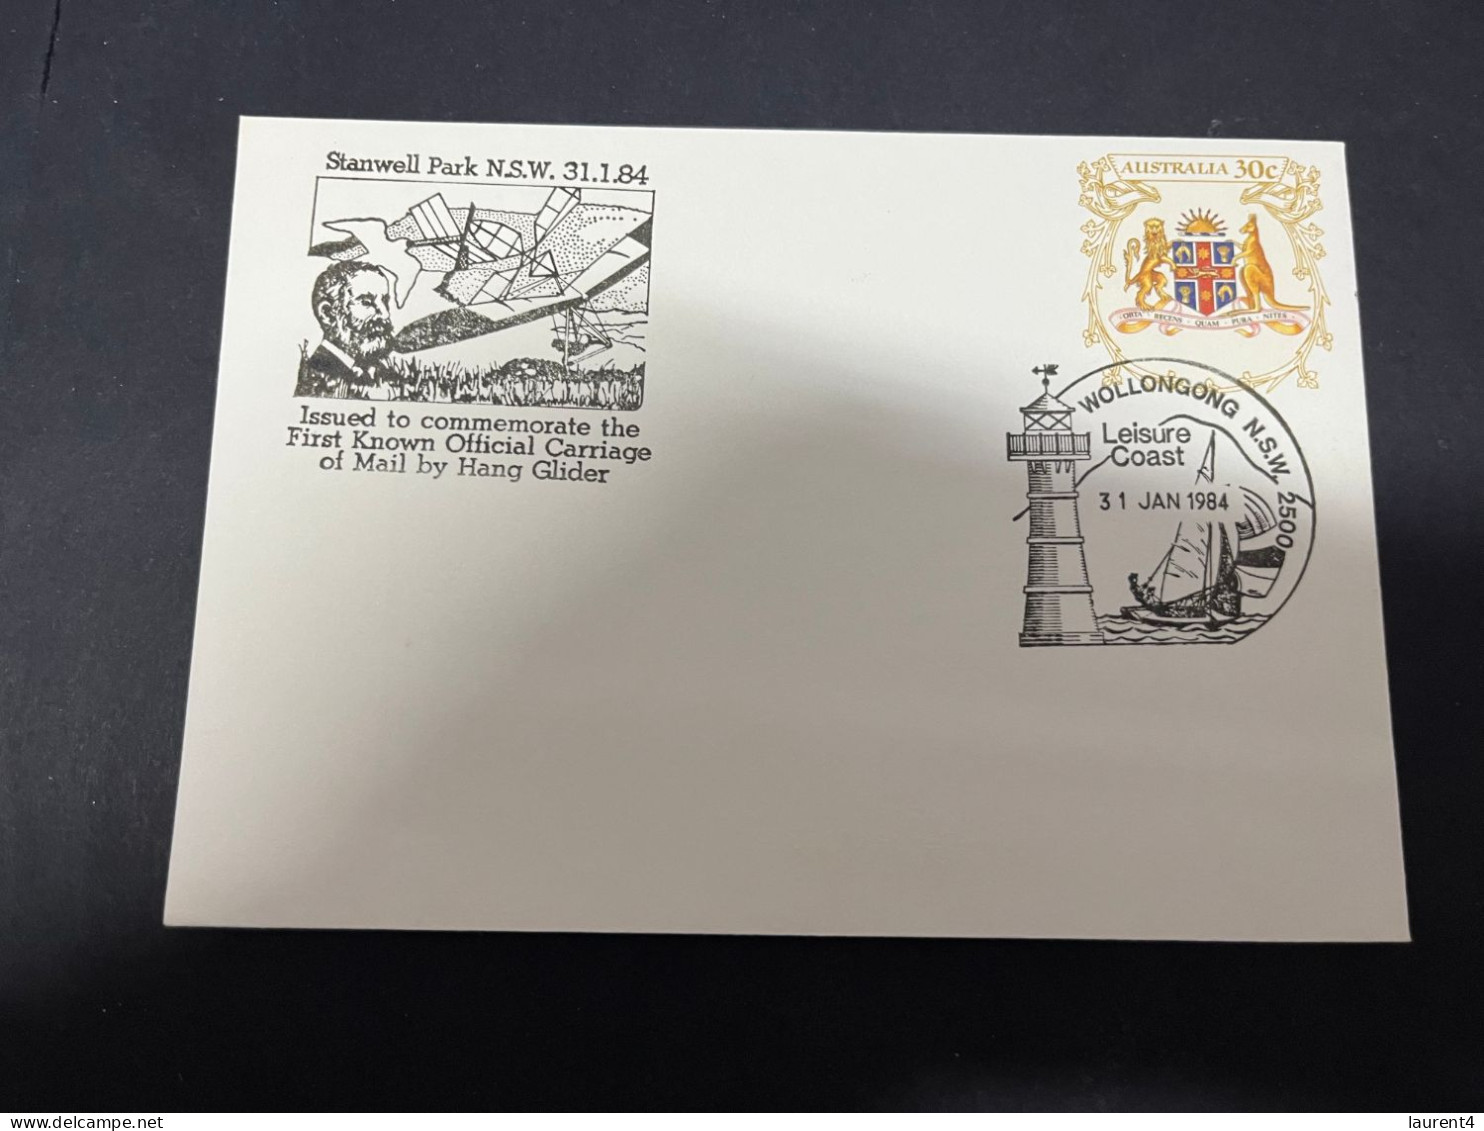 30-4-2023 (3 Z 29) Australia FDC (1 Cover) 1984 - Stanwell Park 1st Mail Via Hand Glider (lighthouse P/m) - Premiers Jours (FDC)